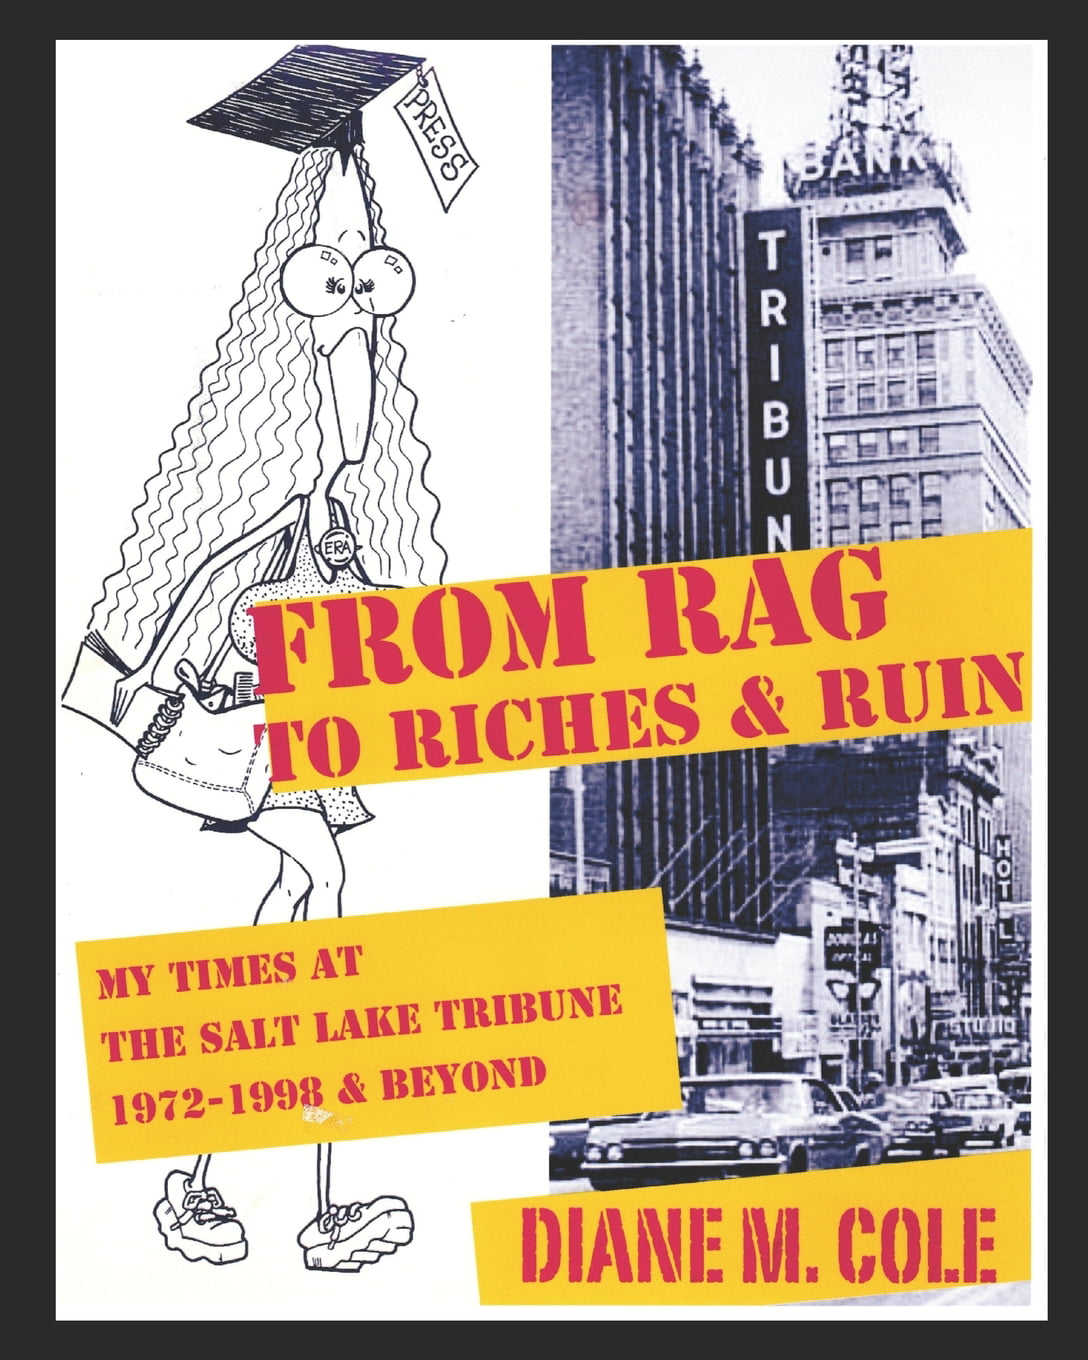 From-Rag-to-Riches--Ruin-My-Times-at-The-Salt-Lake-Tribune-19721998--Beyond